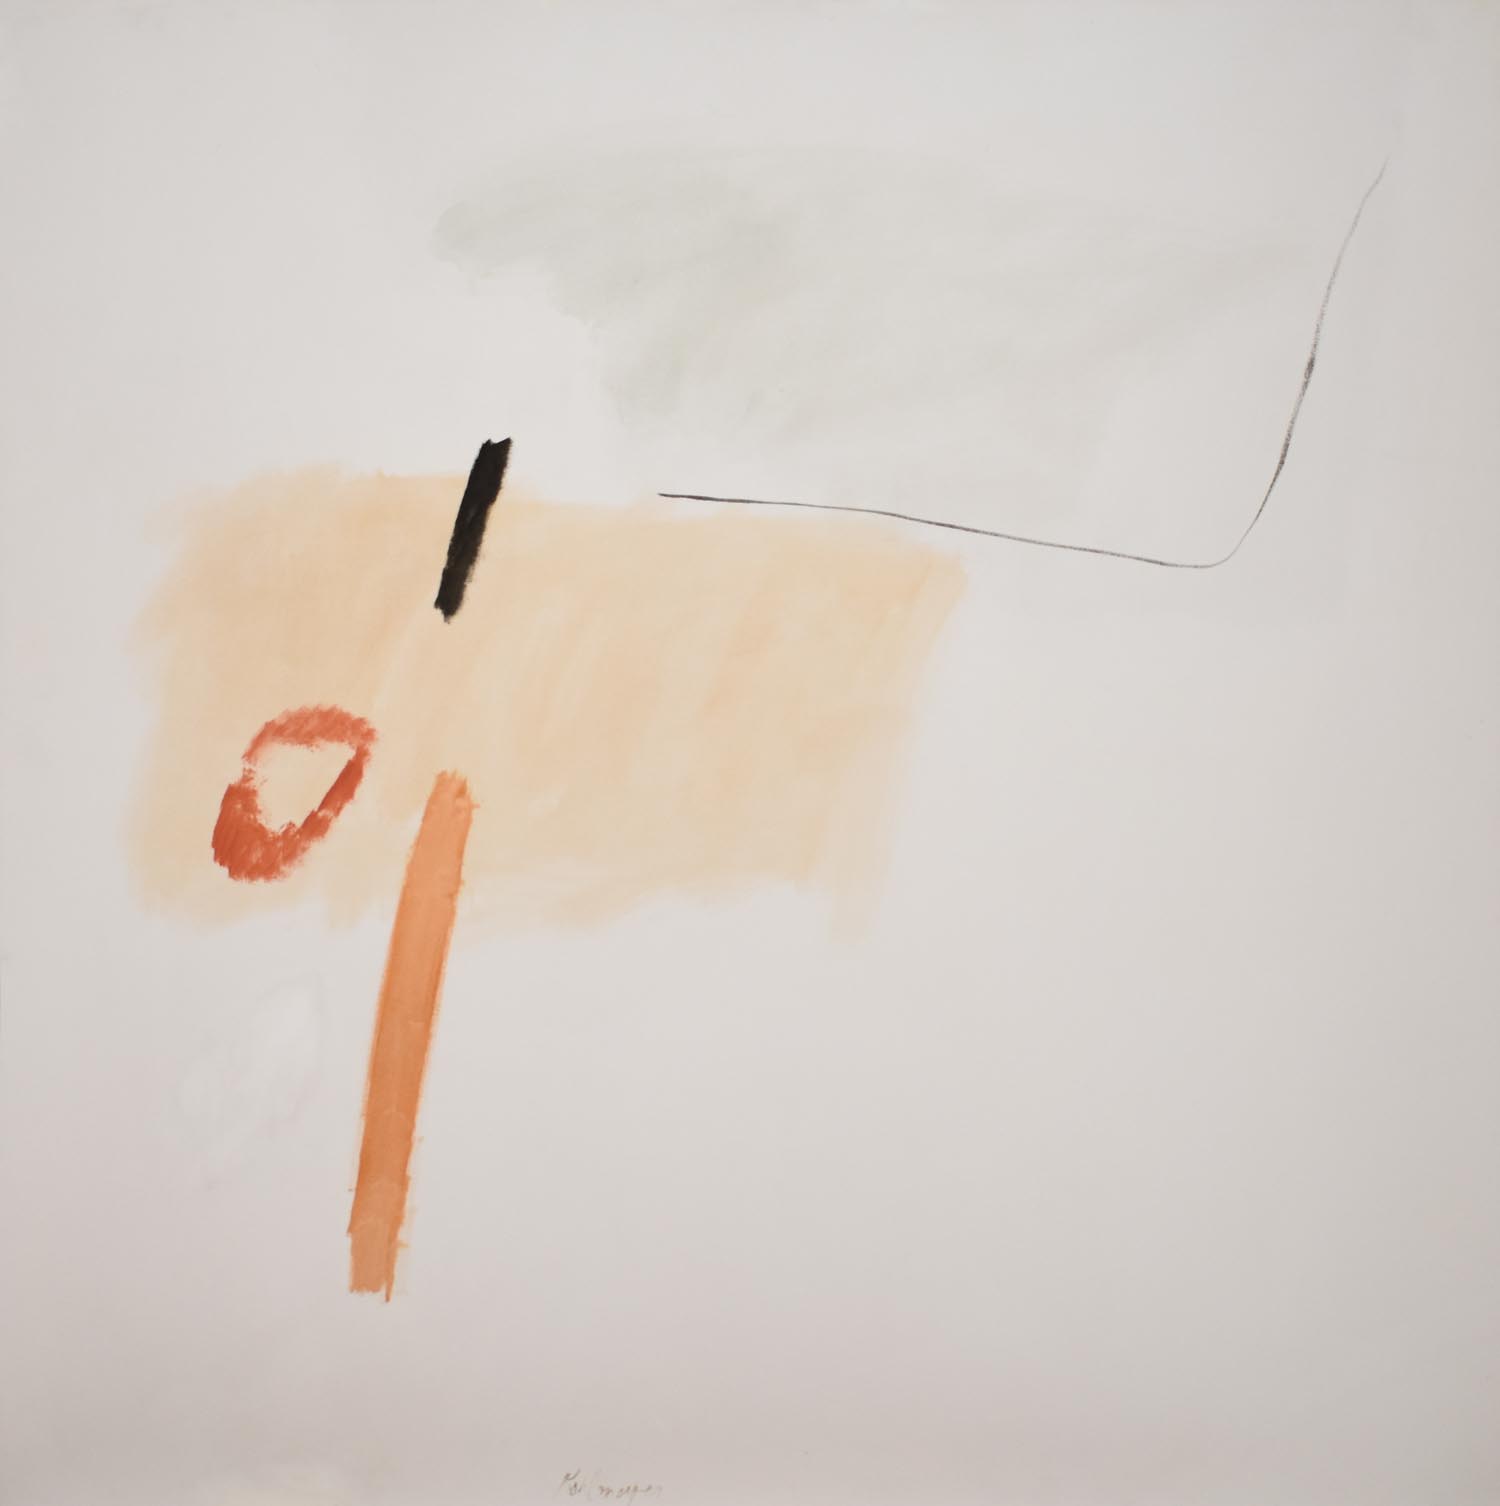   Tangential No. 1 , ca. 1965 Oil on canvas, signed lower middle, 56 3/4 × 55 5/8 in 